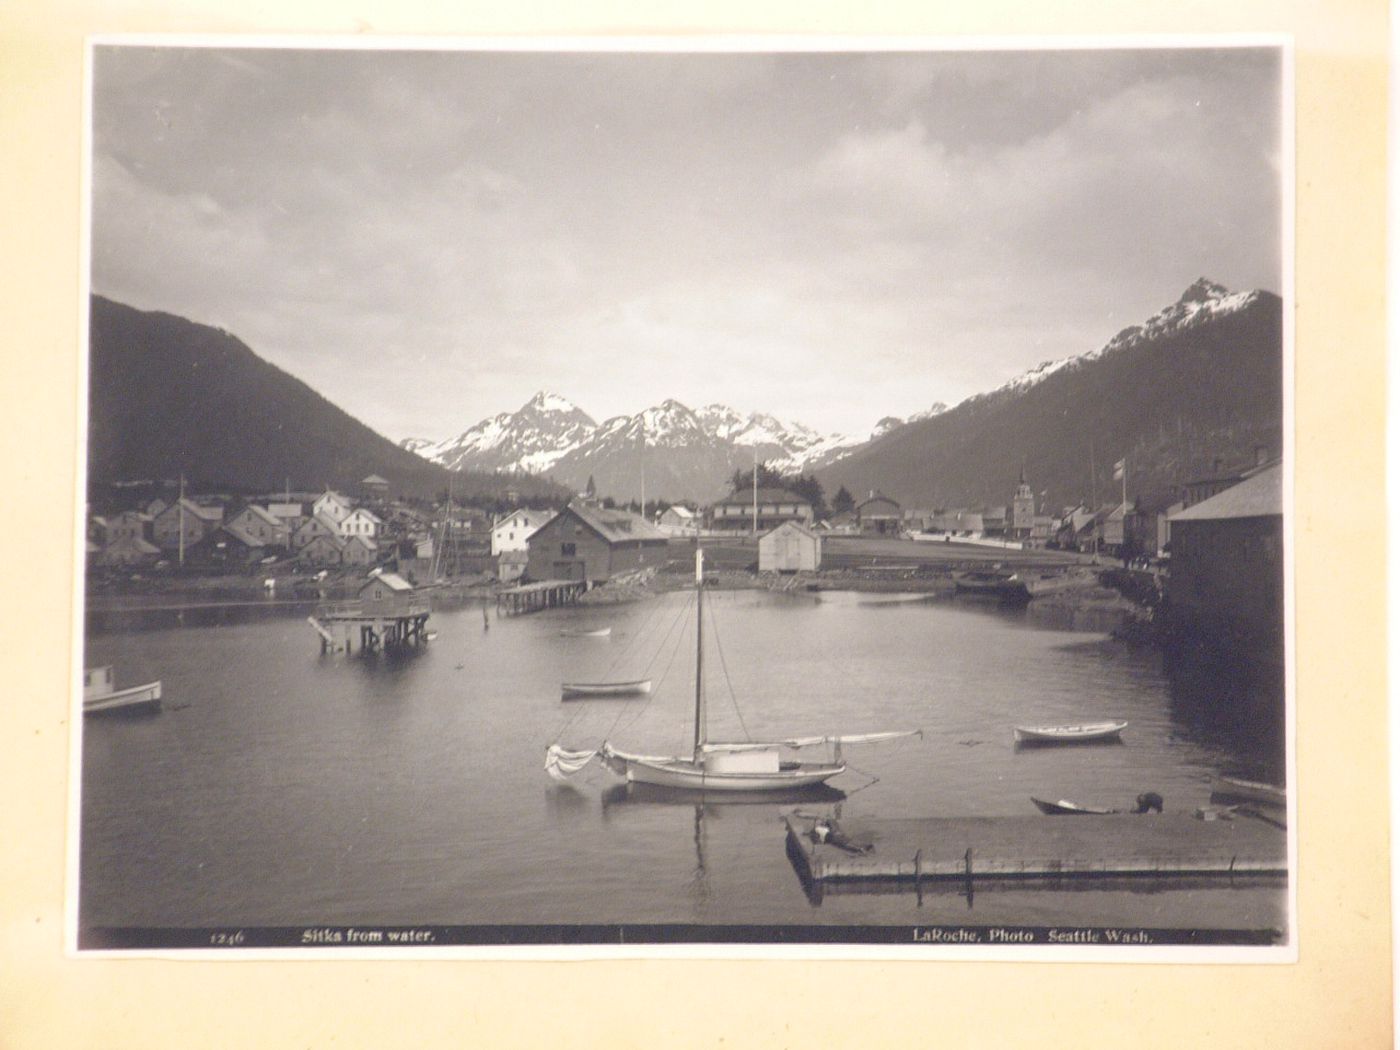 Sitka from water